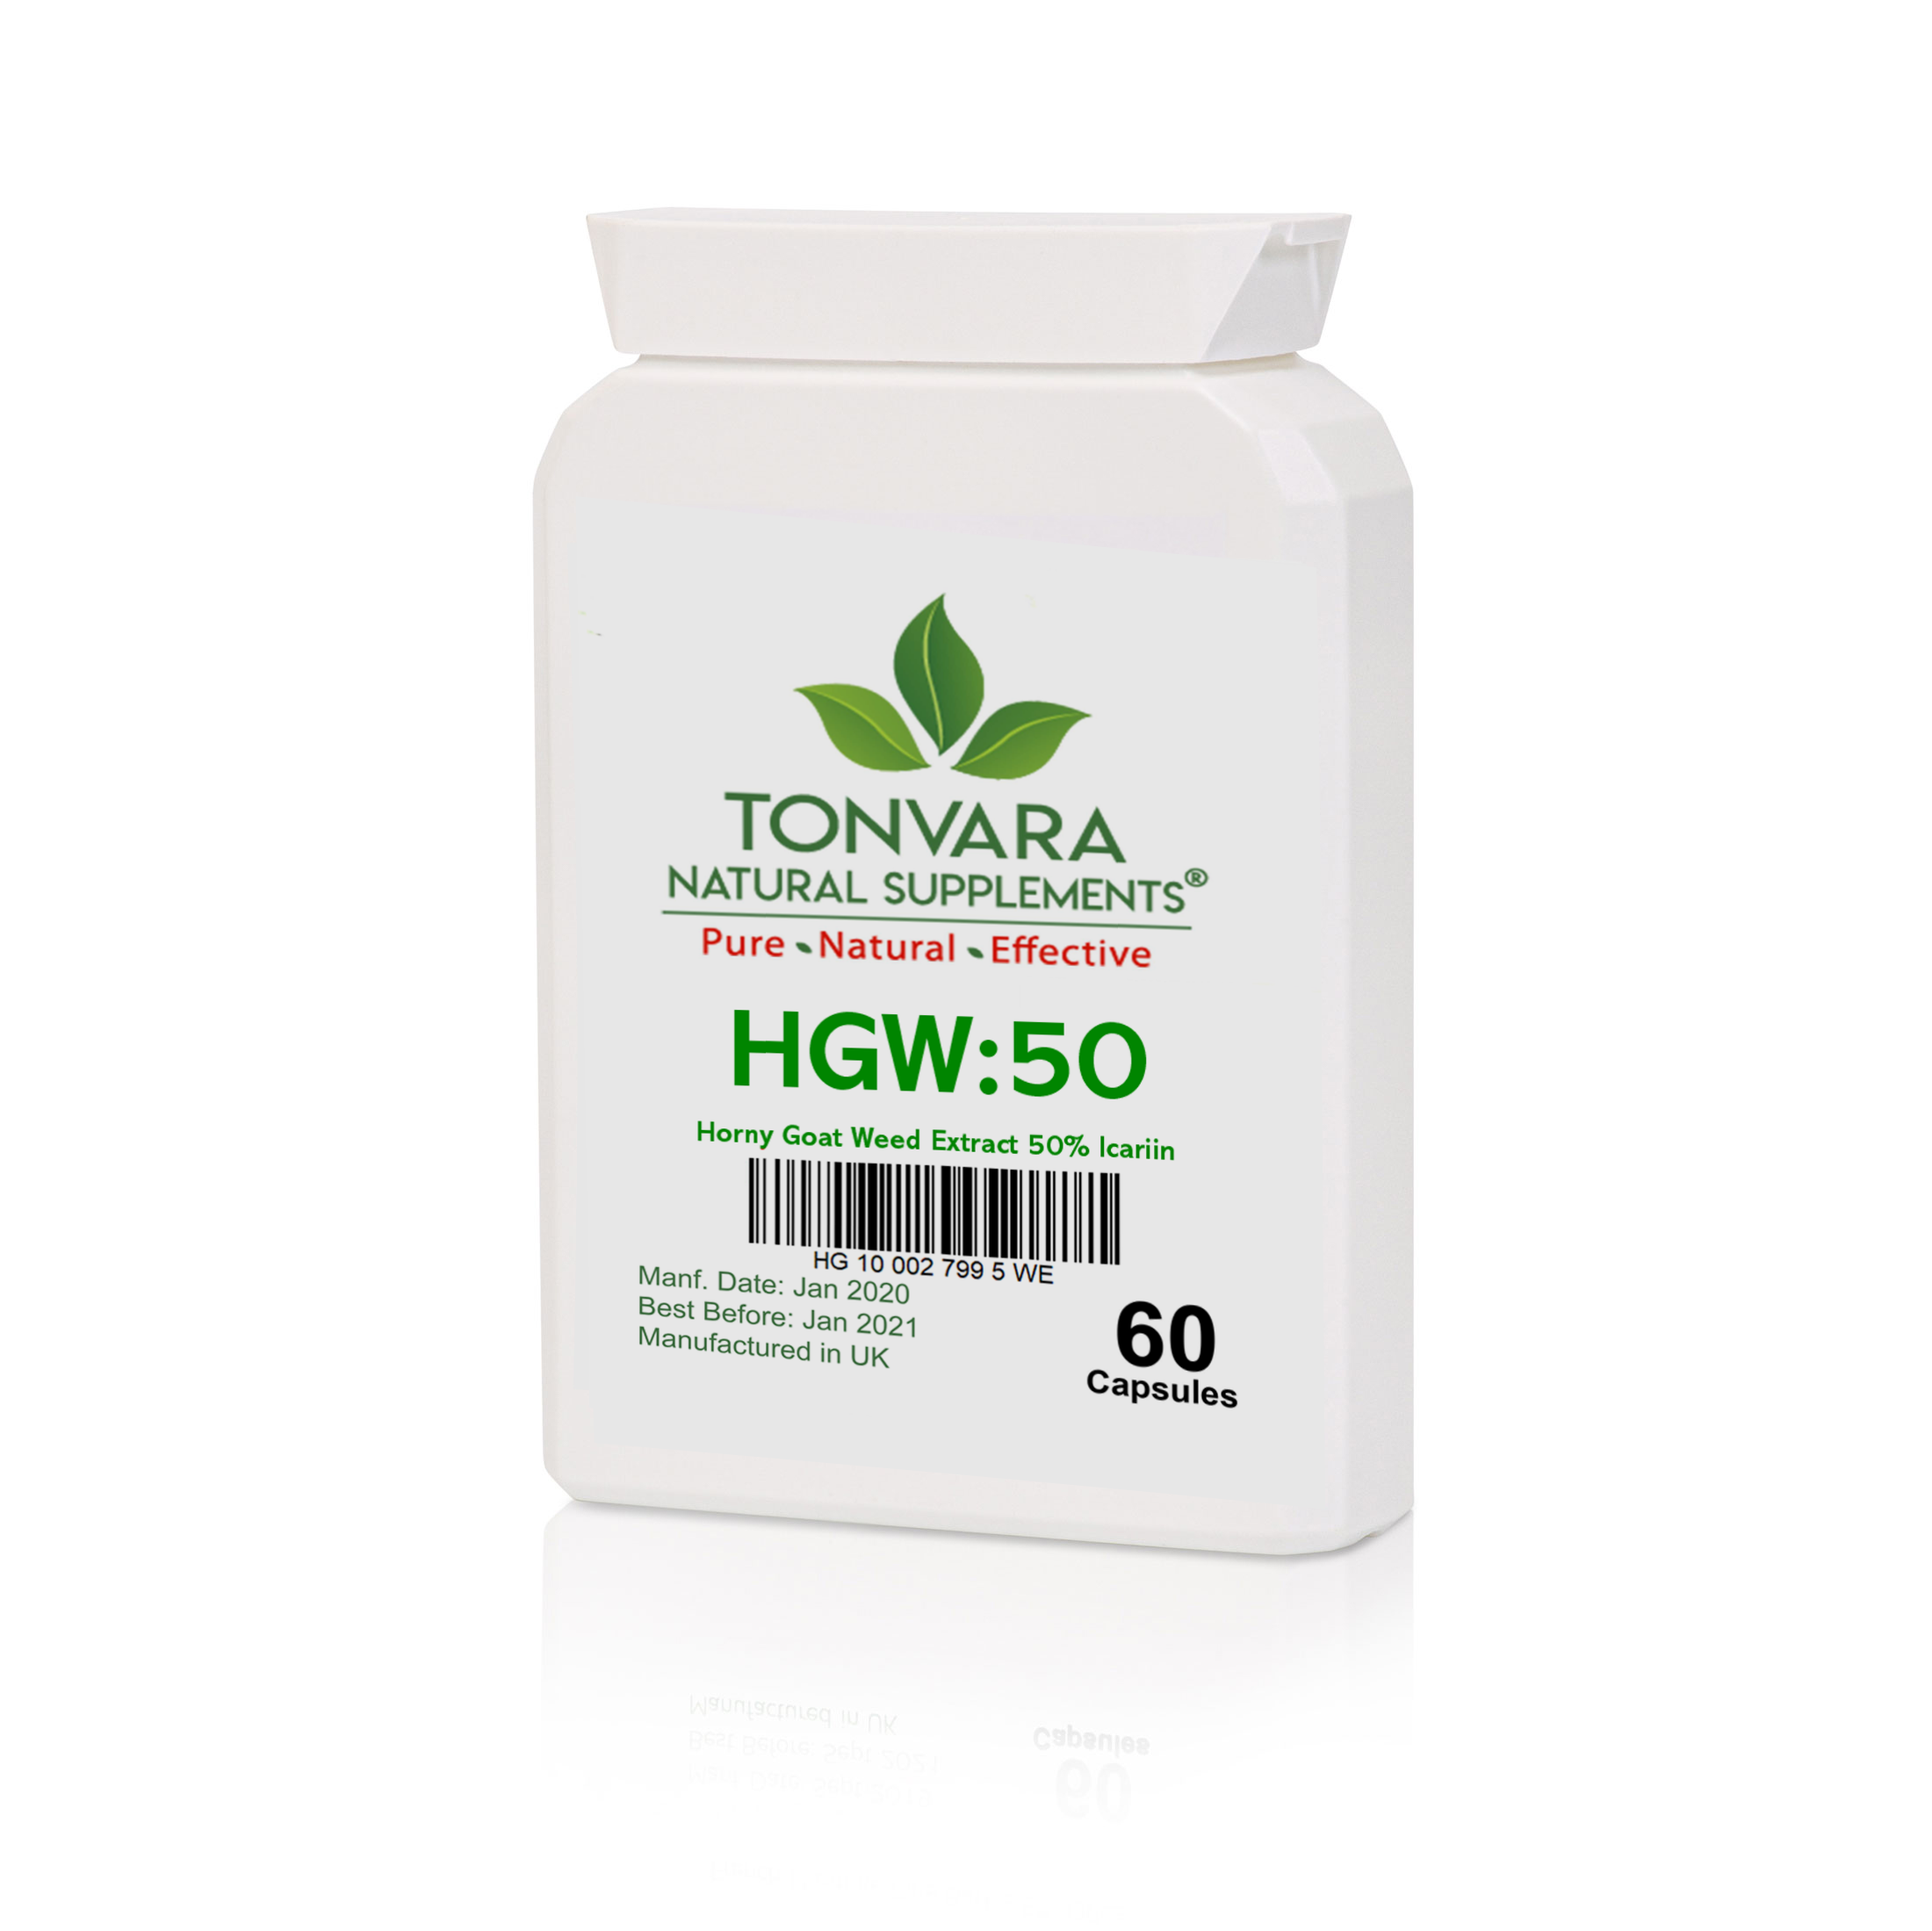 Tonvara HGW:50 Horny Goat Weed 50% Icariin - can improve male intimate functions - now in capsules